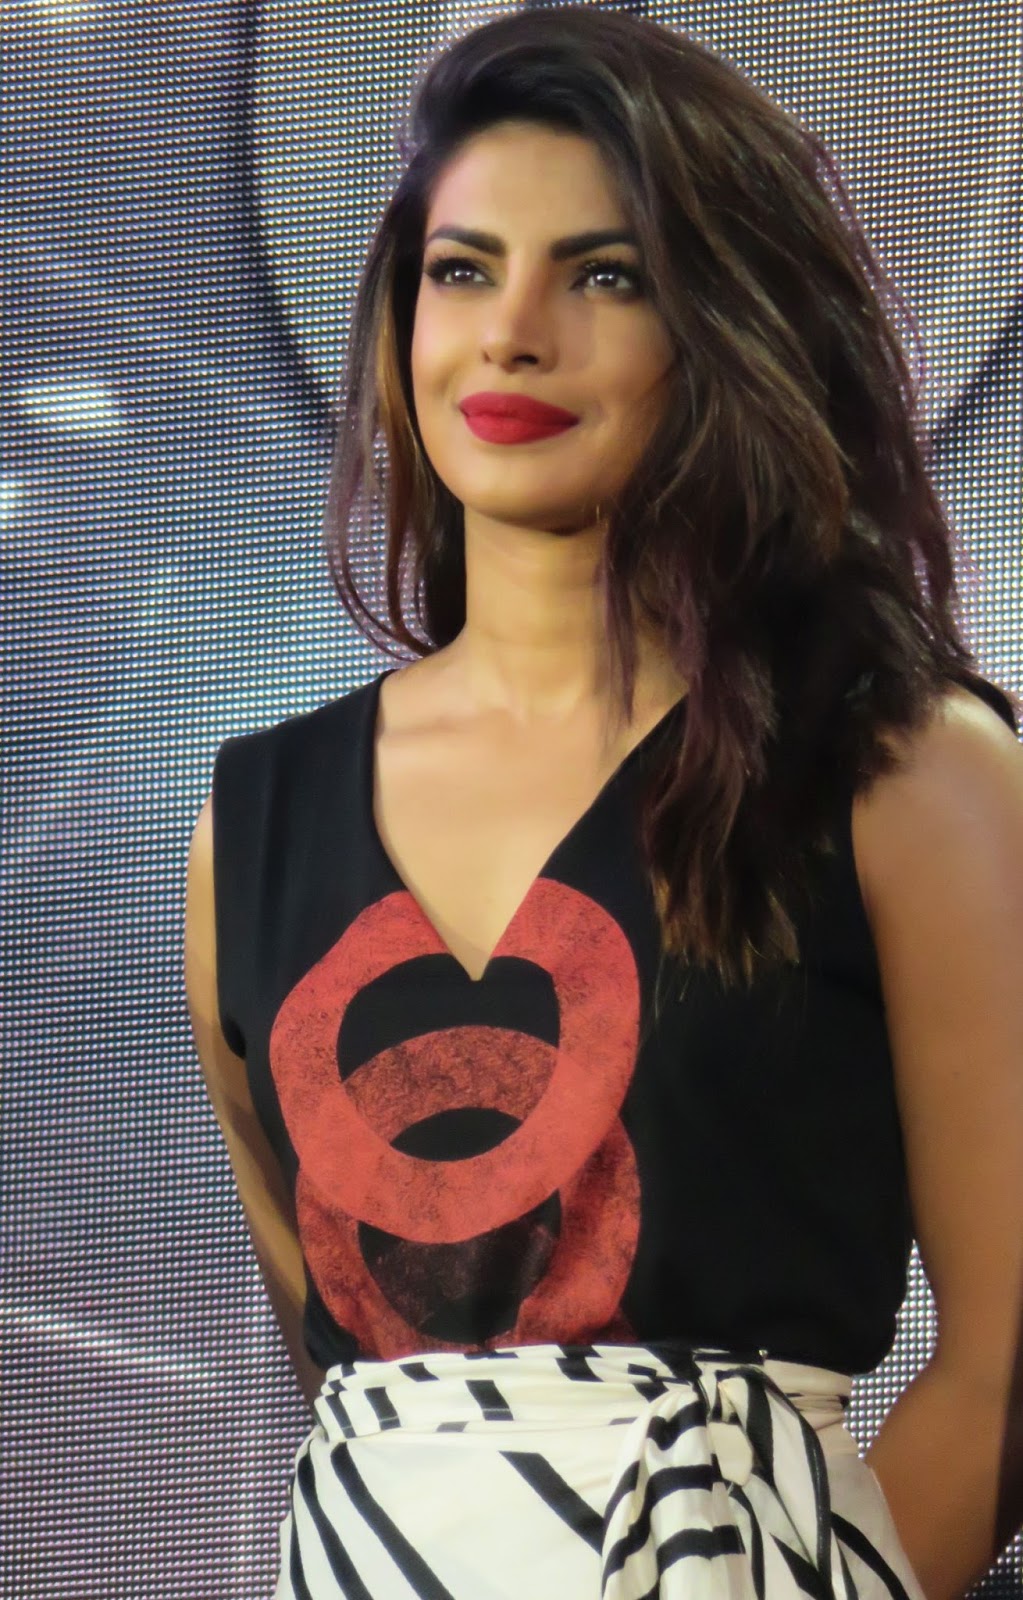 Priyanka Chopra Looks Gorgeous As She Speaks Onstage at Global Citizen Festival 2016 at Central Park in New York City